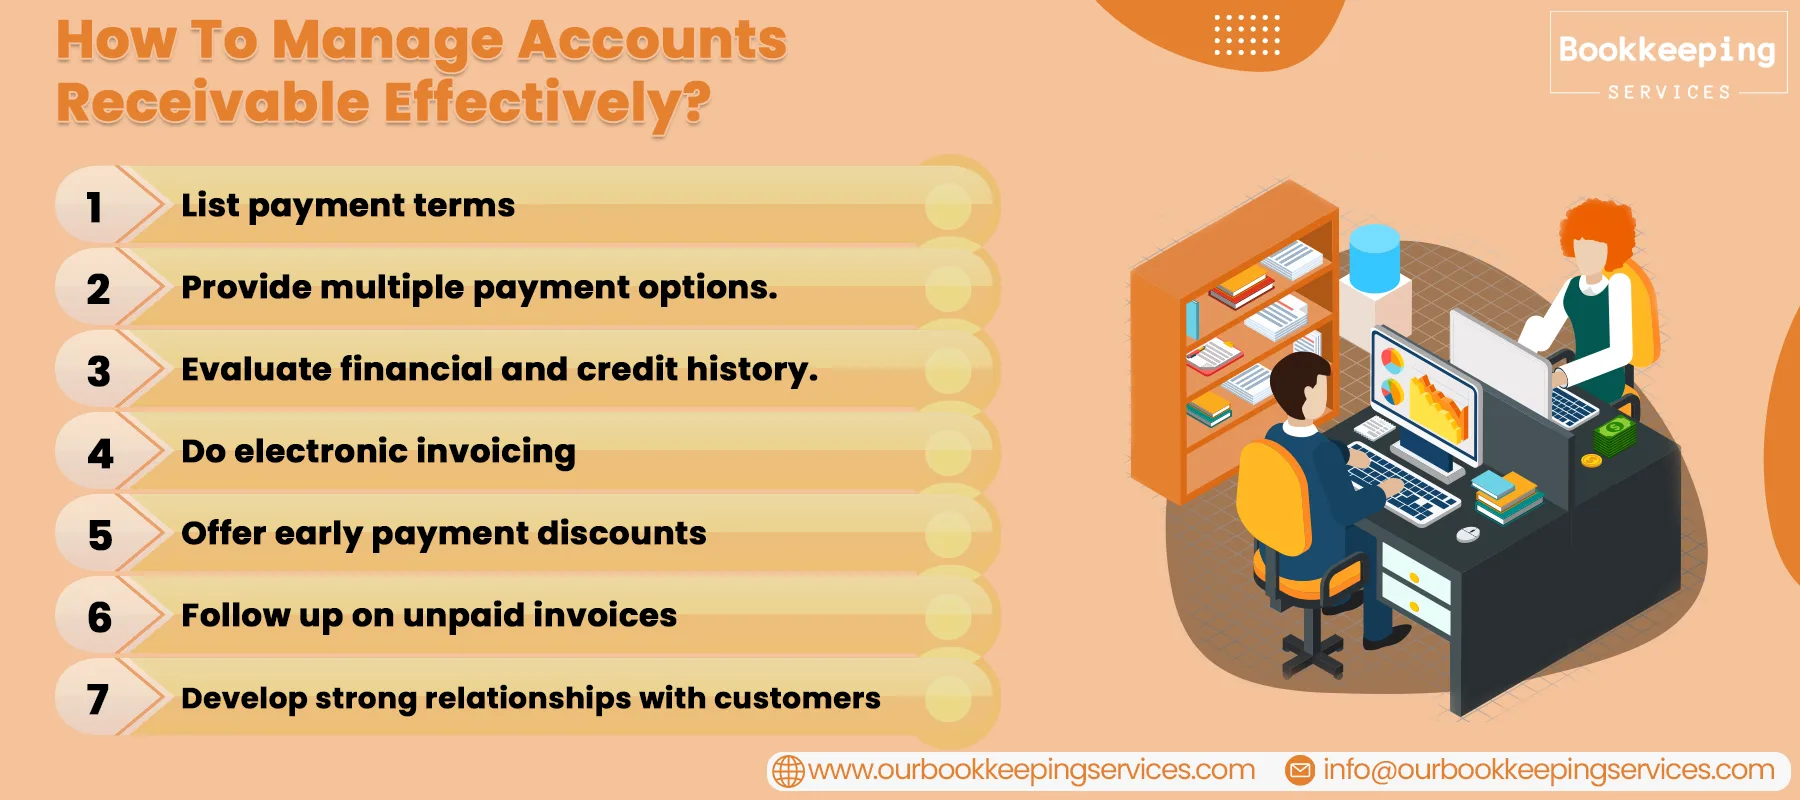 Strategies to Improve Account Receivable Management